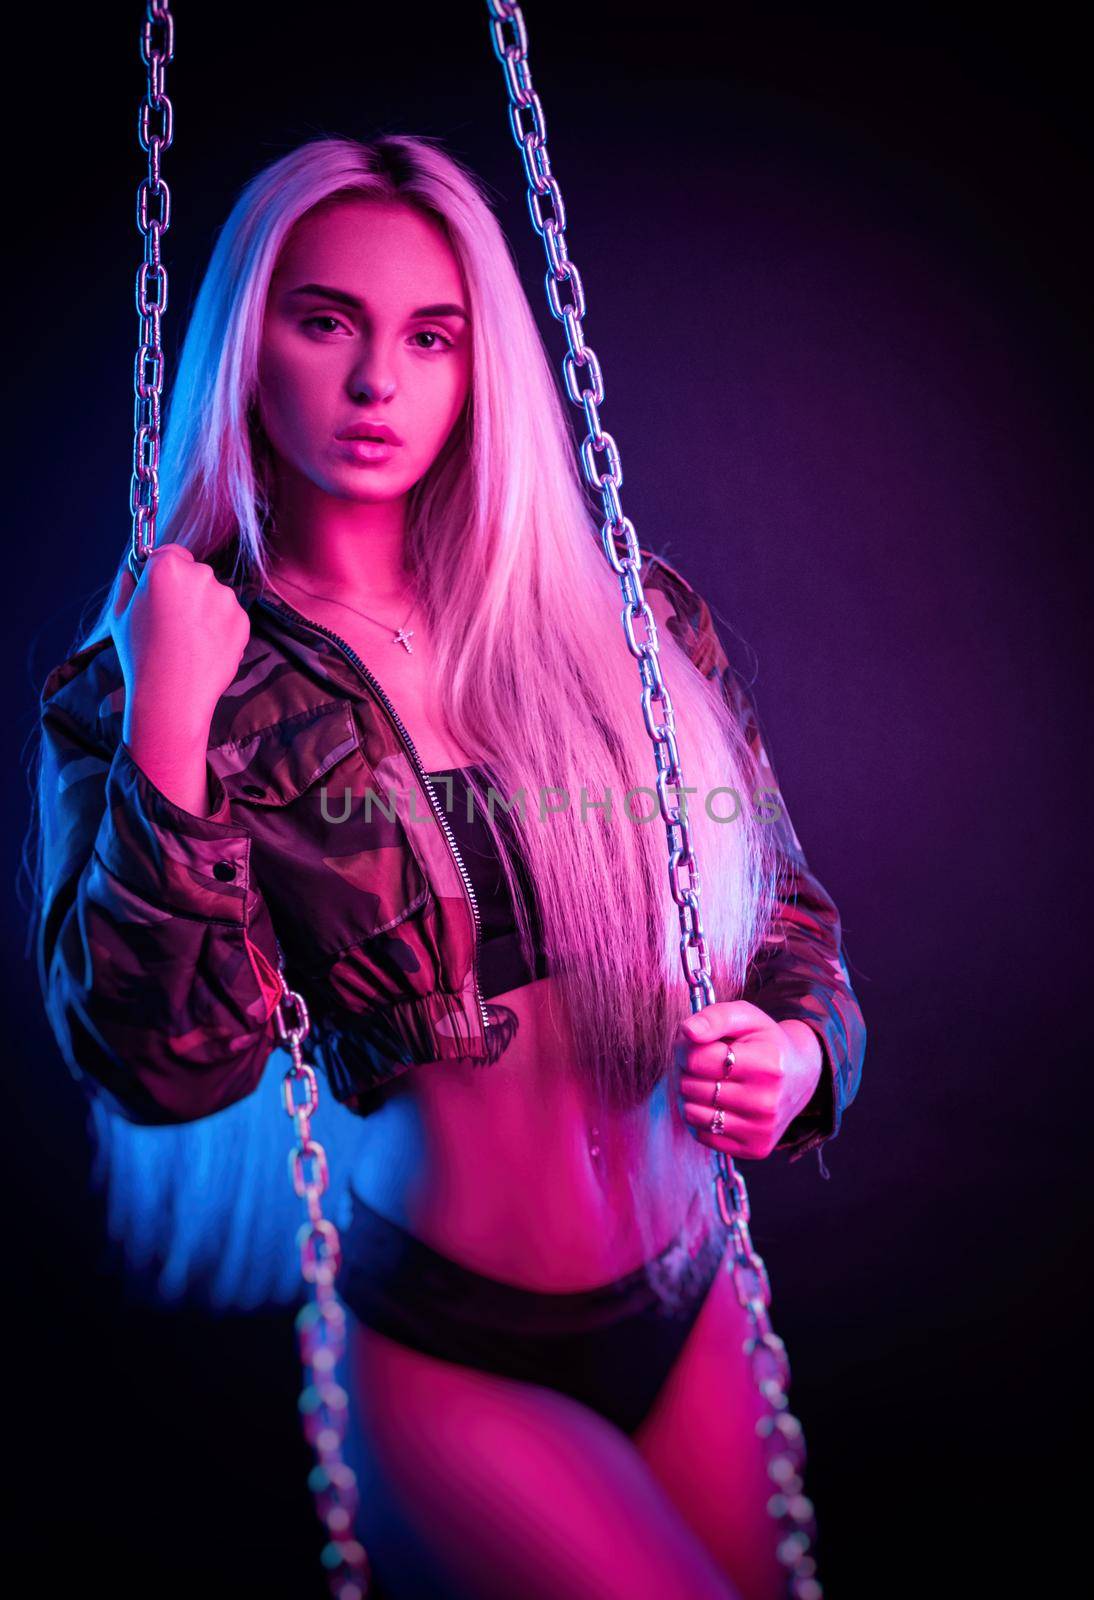 beautiful stylish fashionable girl in bodysuit posing in photo Studio on dark background with chains in neon light by Rotozey